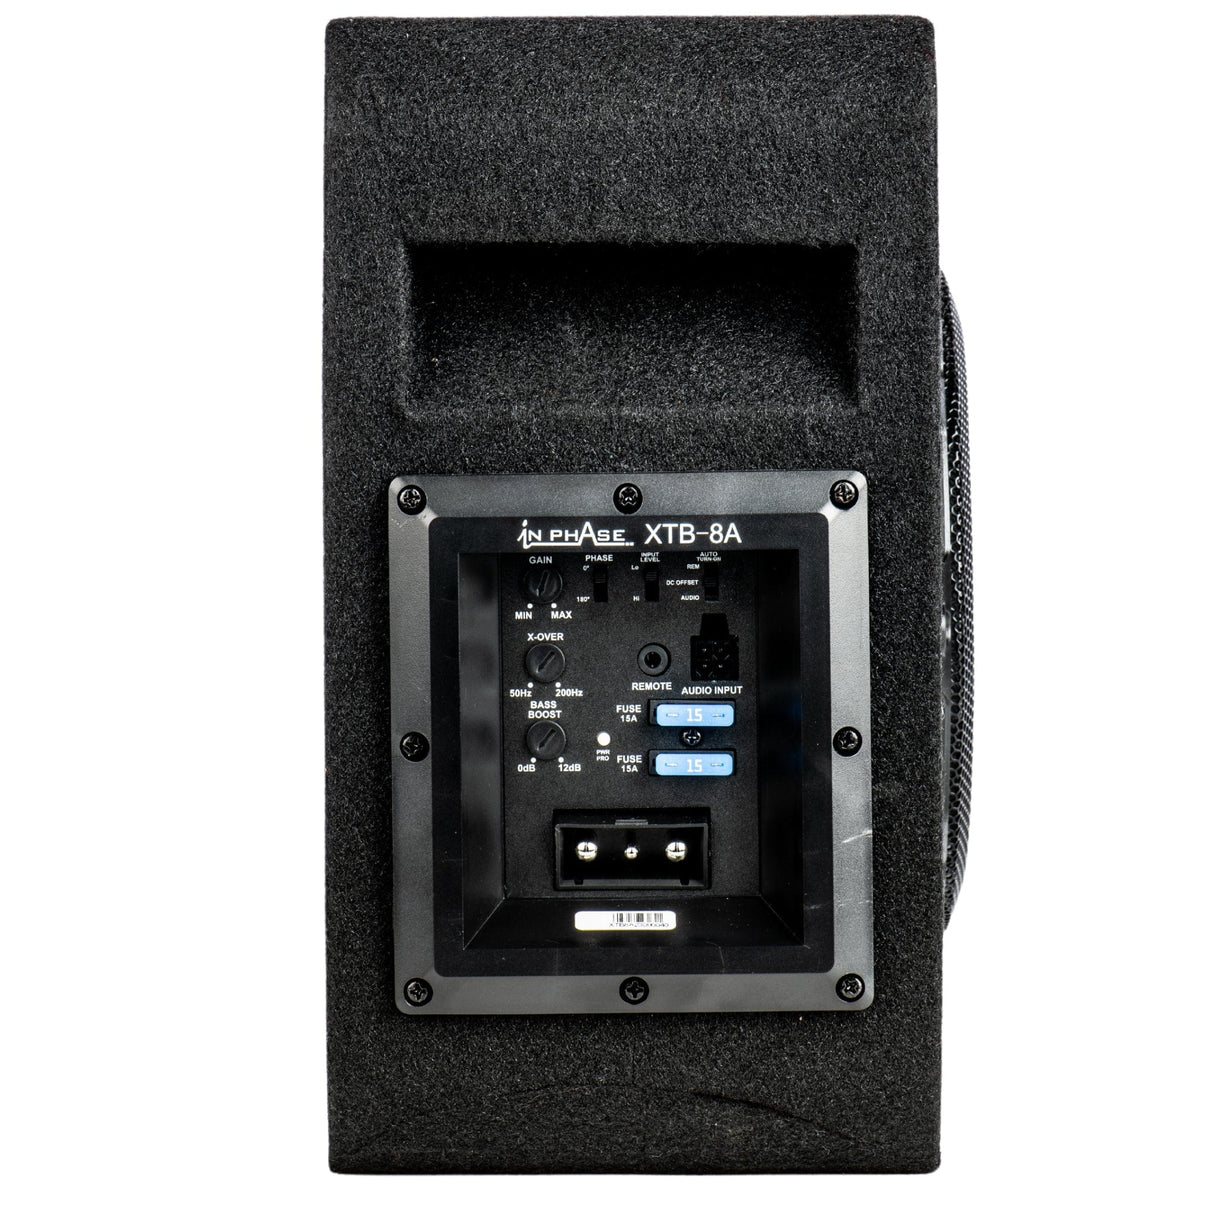 In Phase Car Subwoofers In Phase XTB-8A 600W Active Amplified Subwoofer Enclosure with Built in Class D Amp, Bass Remote and Quick Release Connections